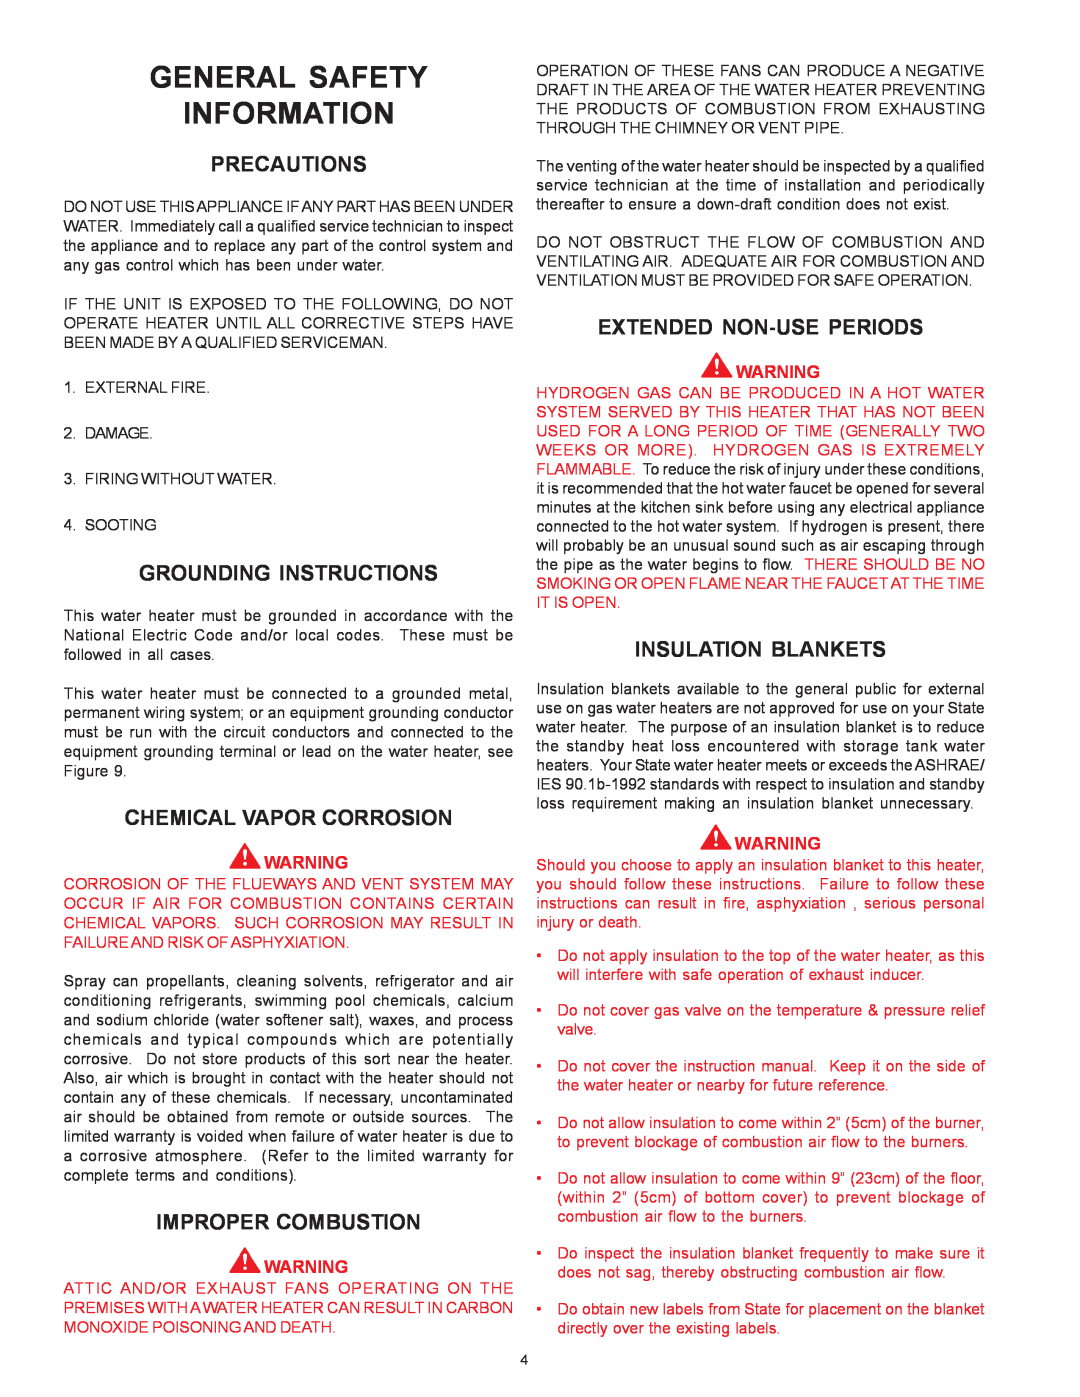 State Industries SBN85390NE/A General Safety Information, Precautions, Grounding Instructions, Chemical Vapor Corrosion 